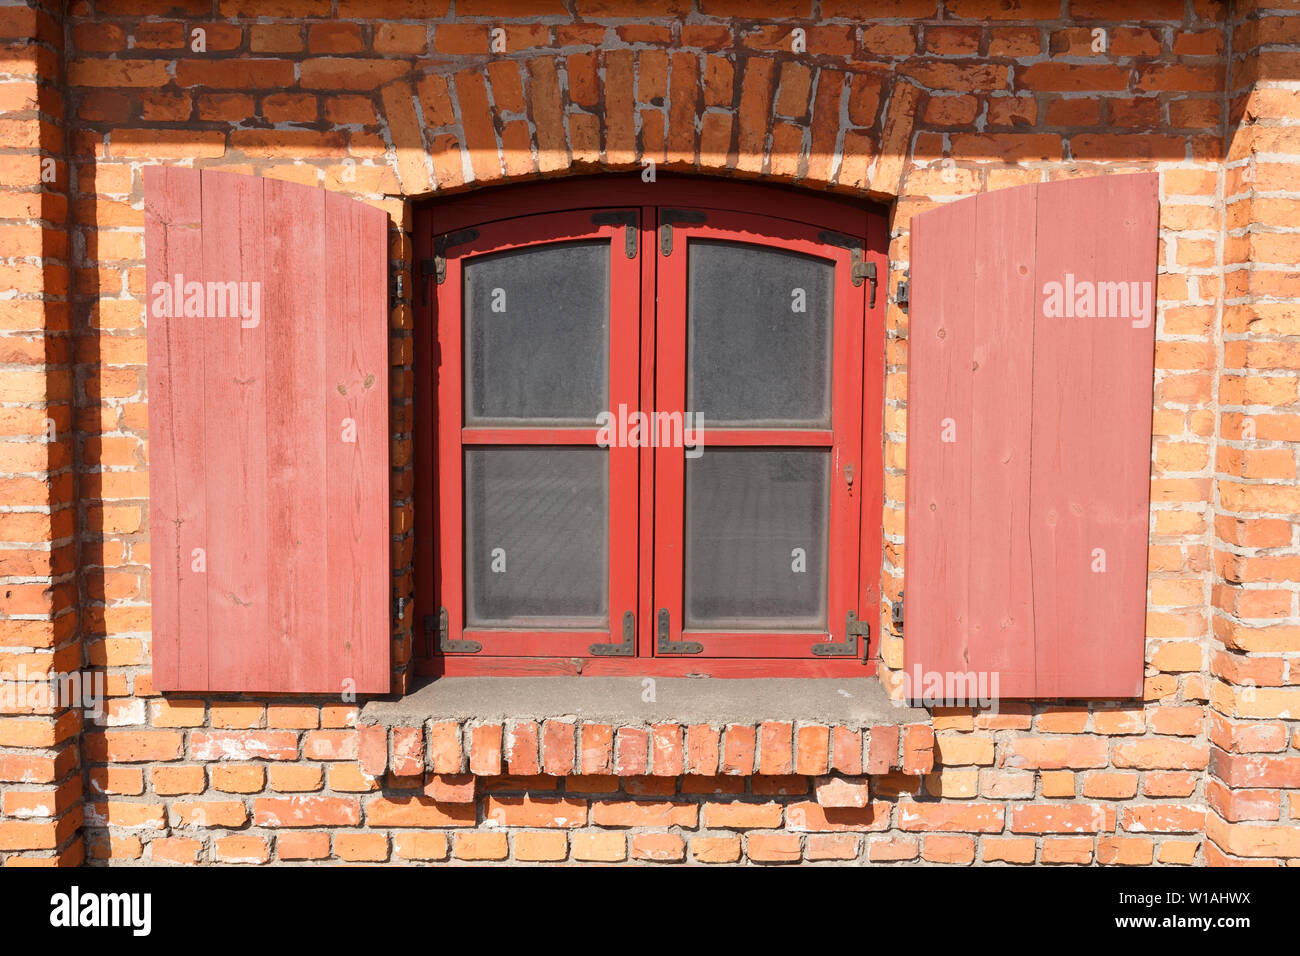 wooden window with shutters Stock Photo